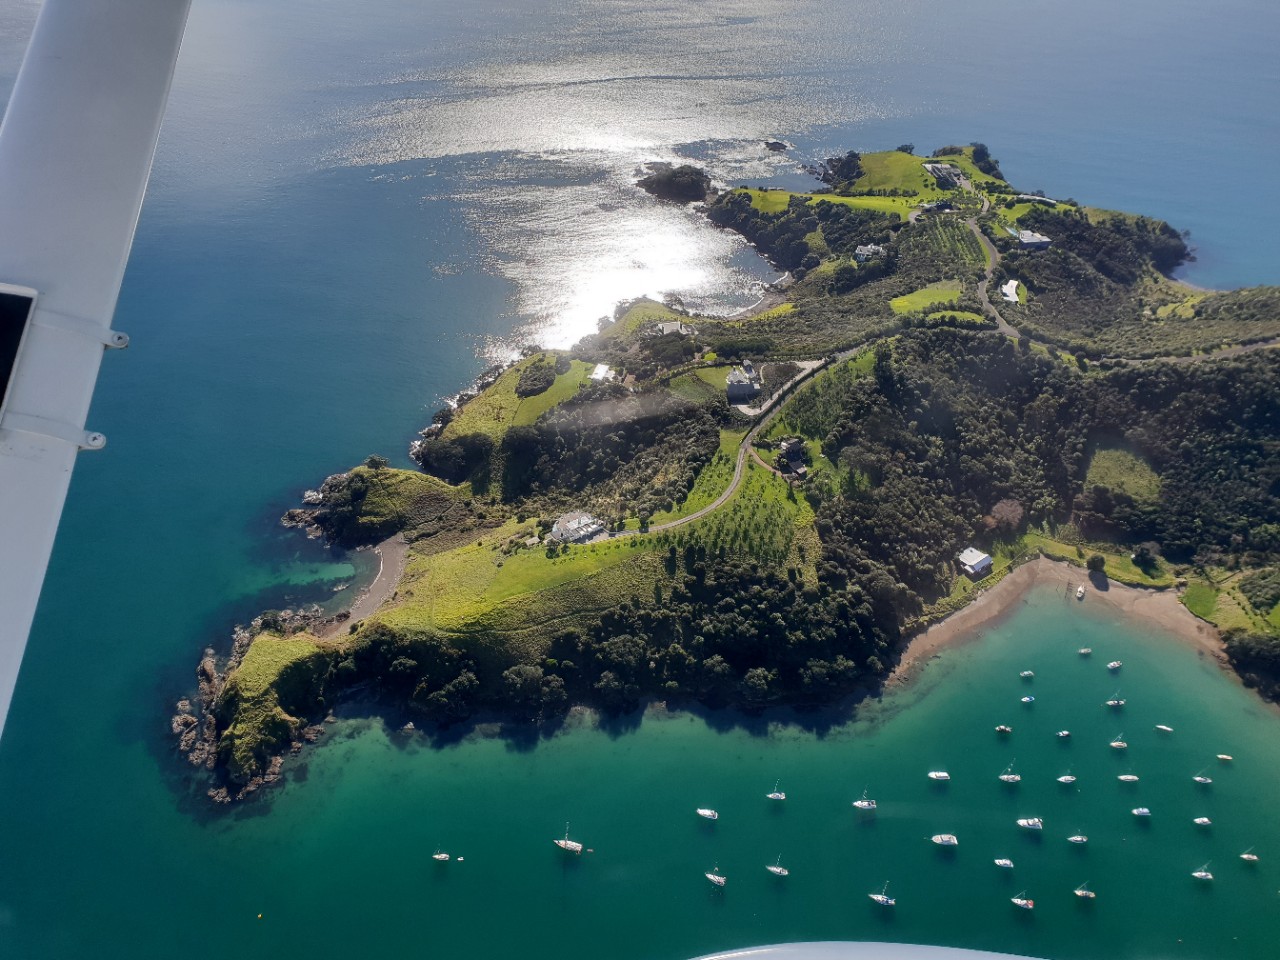 Auckland's Waiheke Island bay with moored yachts & boats from the air